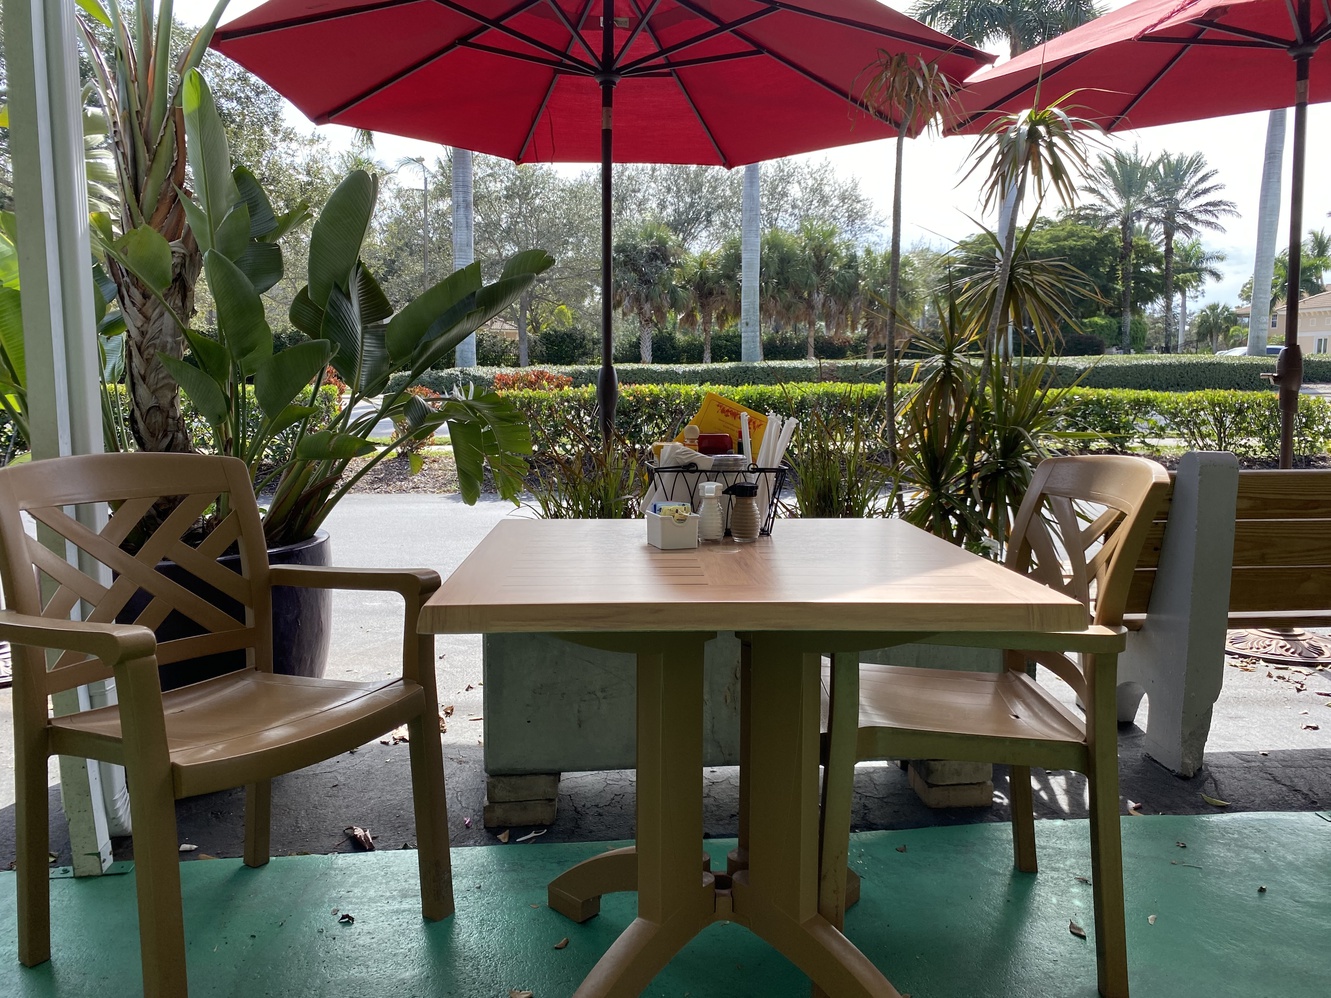 Many of the outdoor tables have umbrellas for shade from the
      sun.